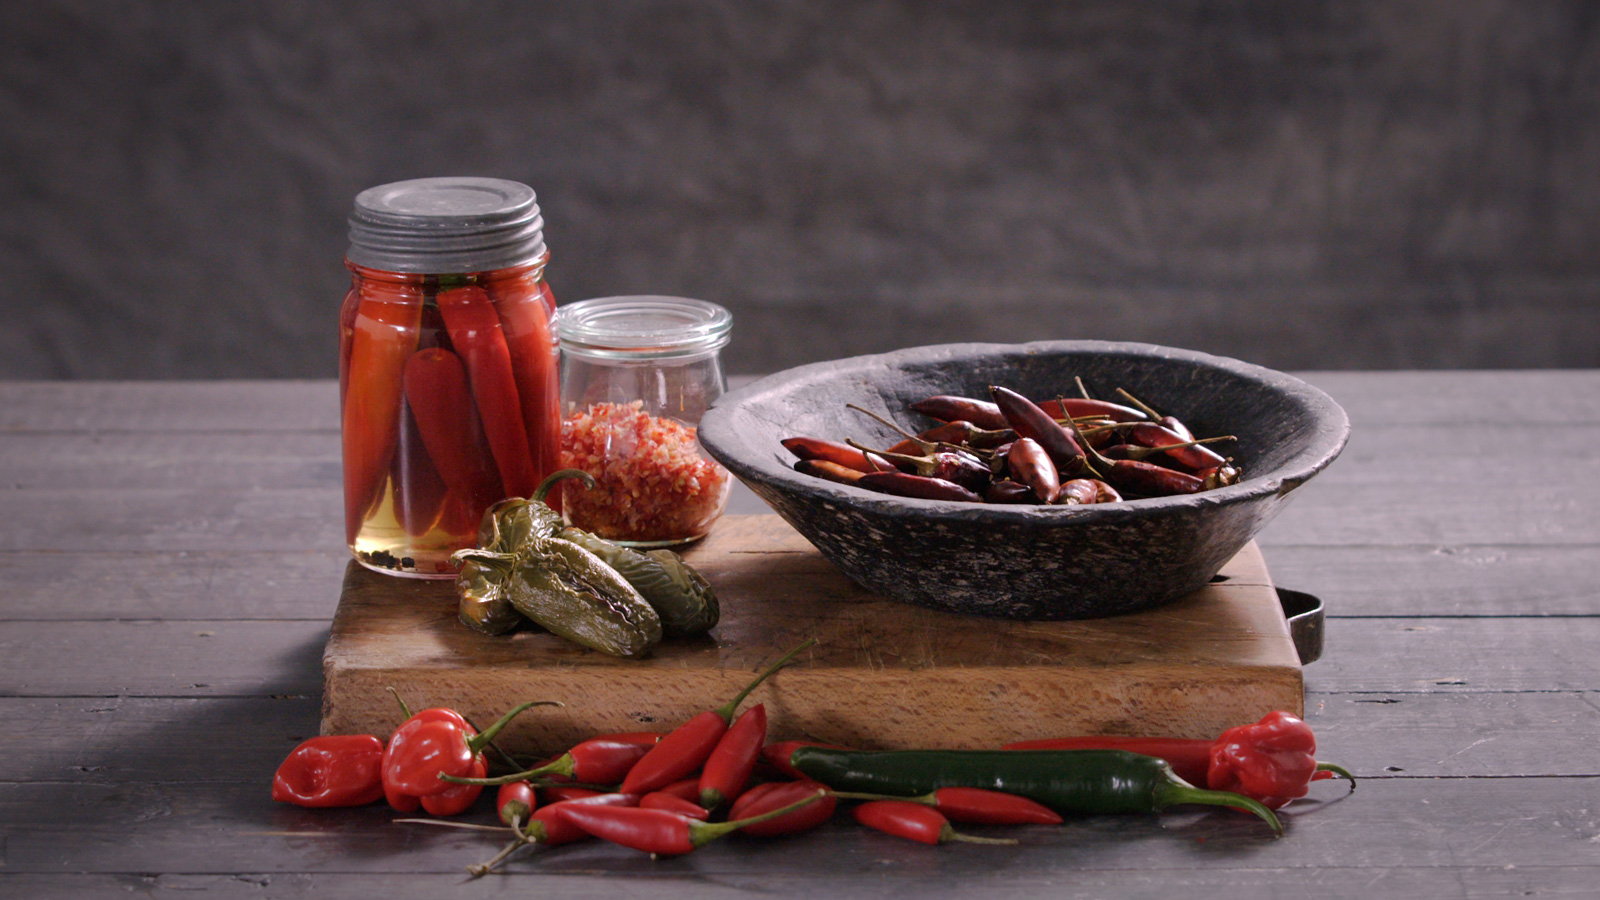 3 ways to preserve chillies (How to dry, pickle & store chillies) - The NEFF Kitchen